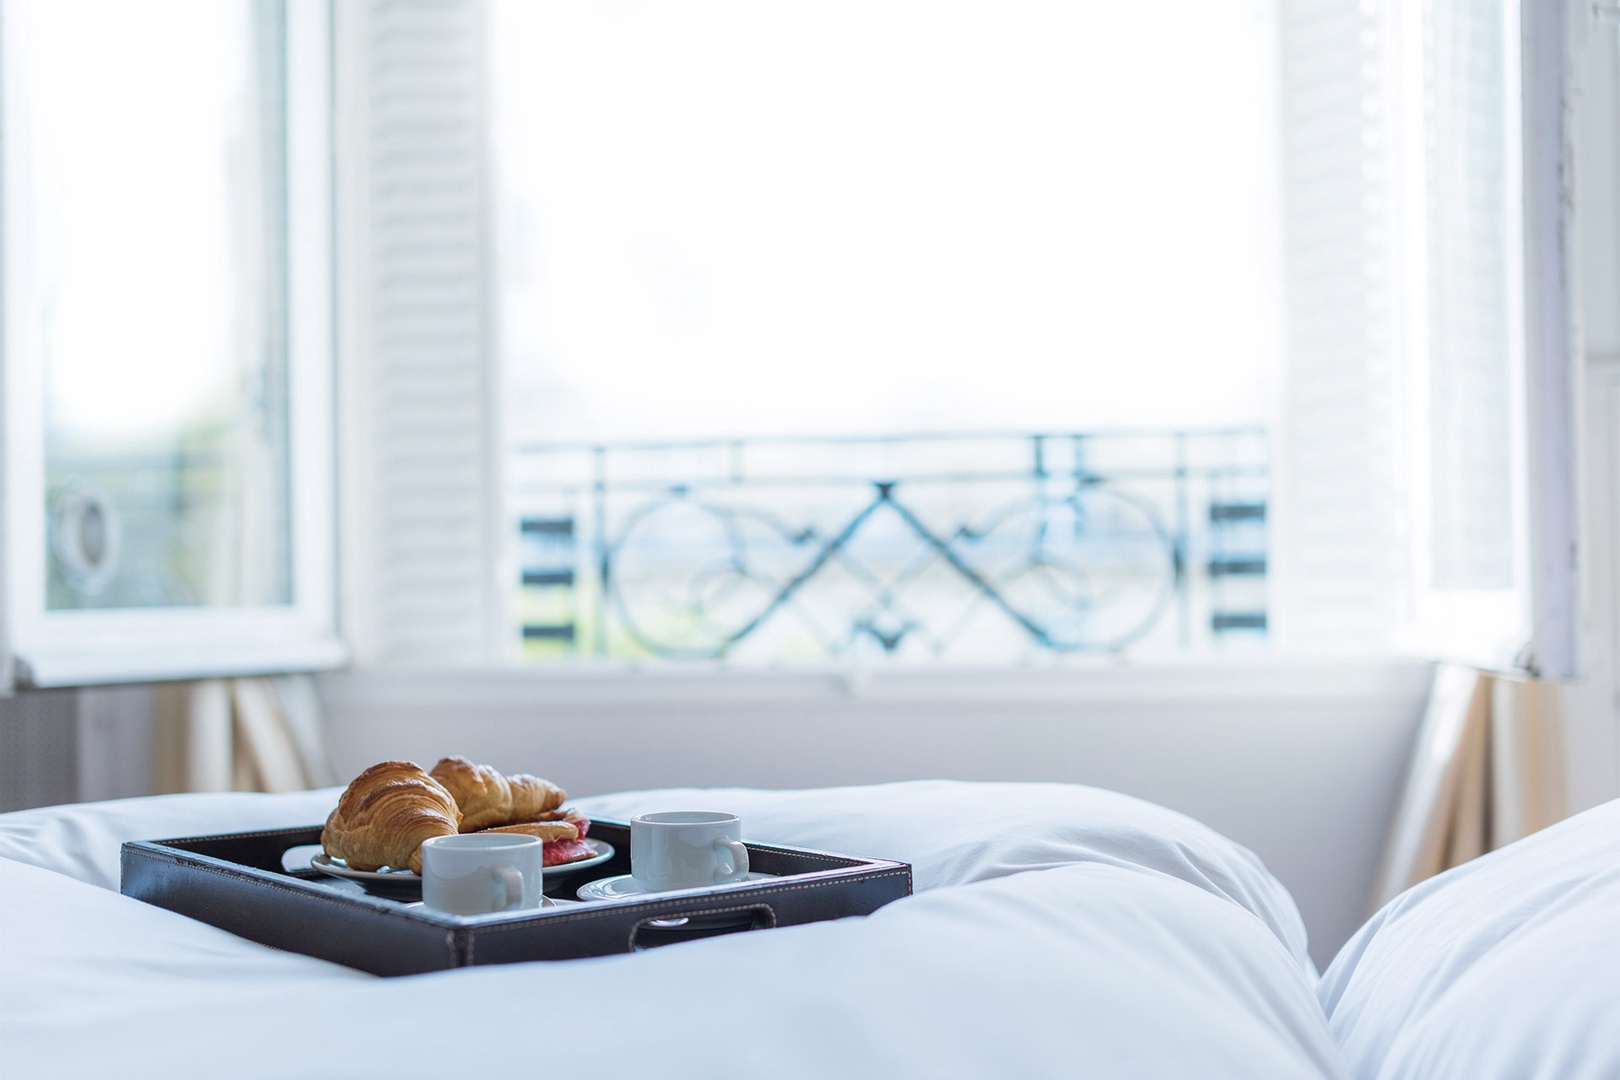 Start your day with a petit-dejeuner in bed!